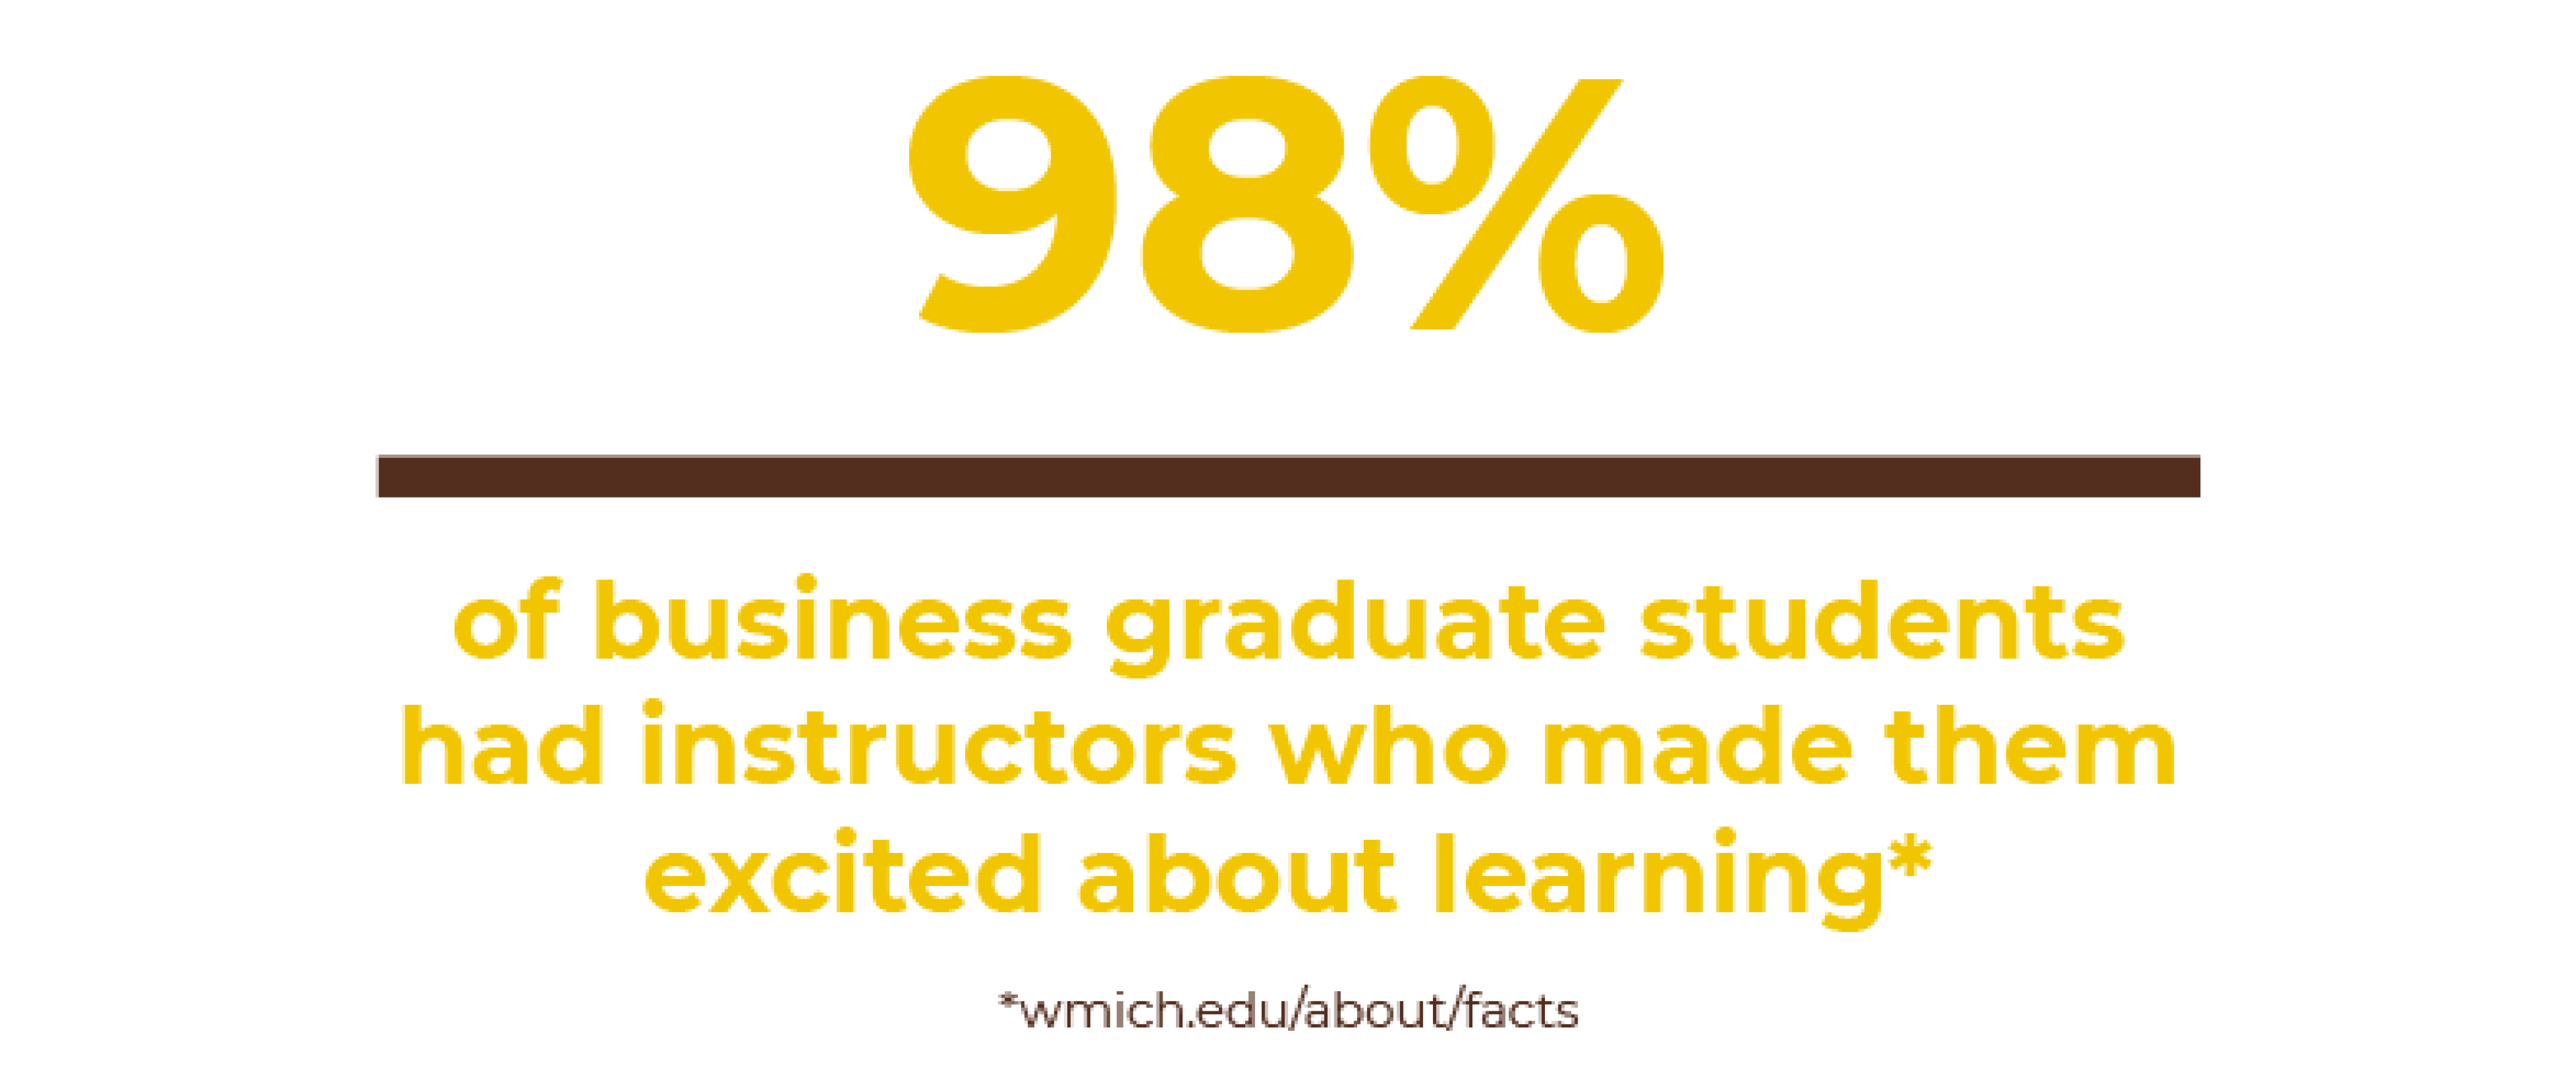 98% of business graduate students had instructors who made them excited about learning*